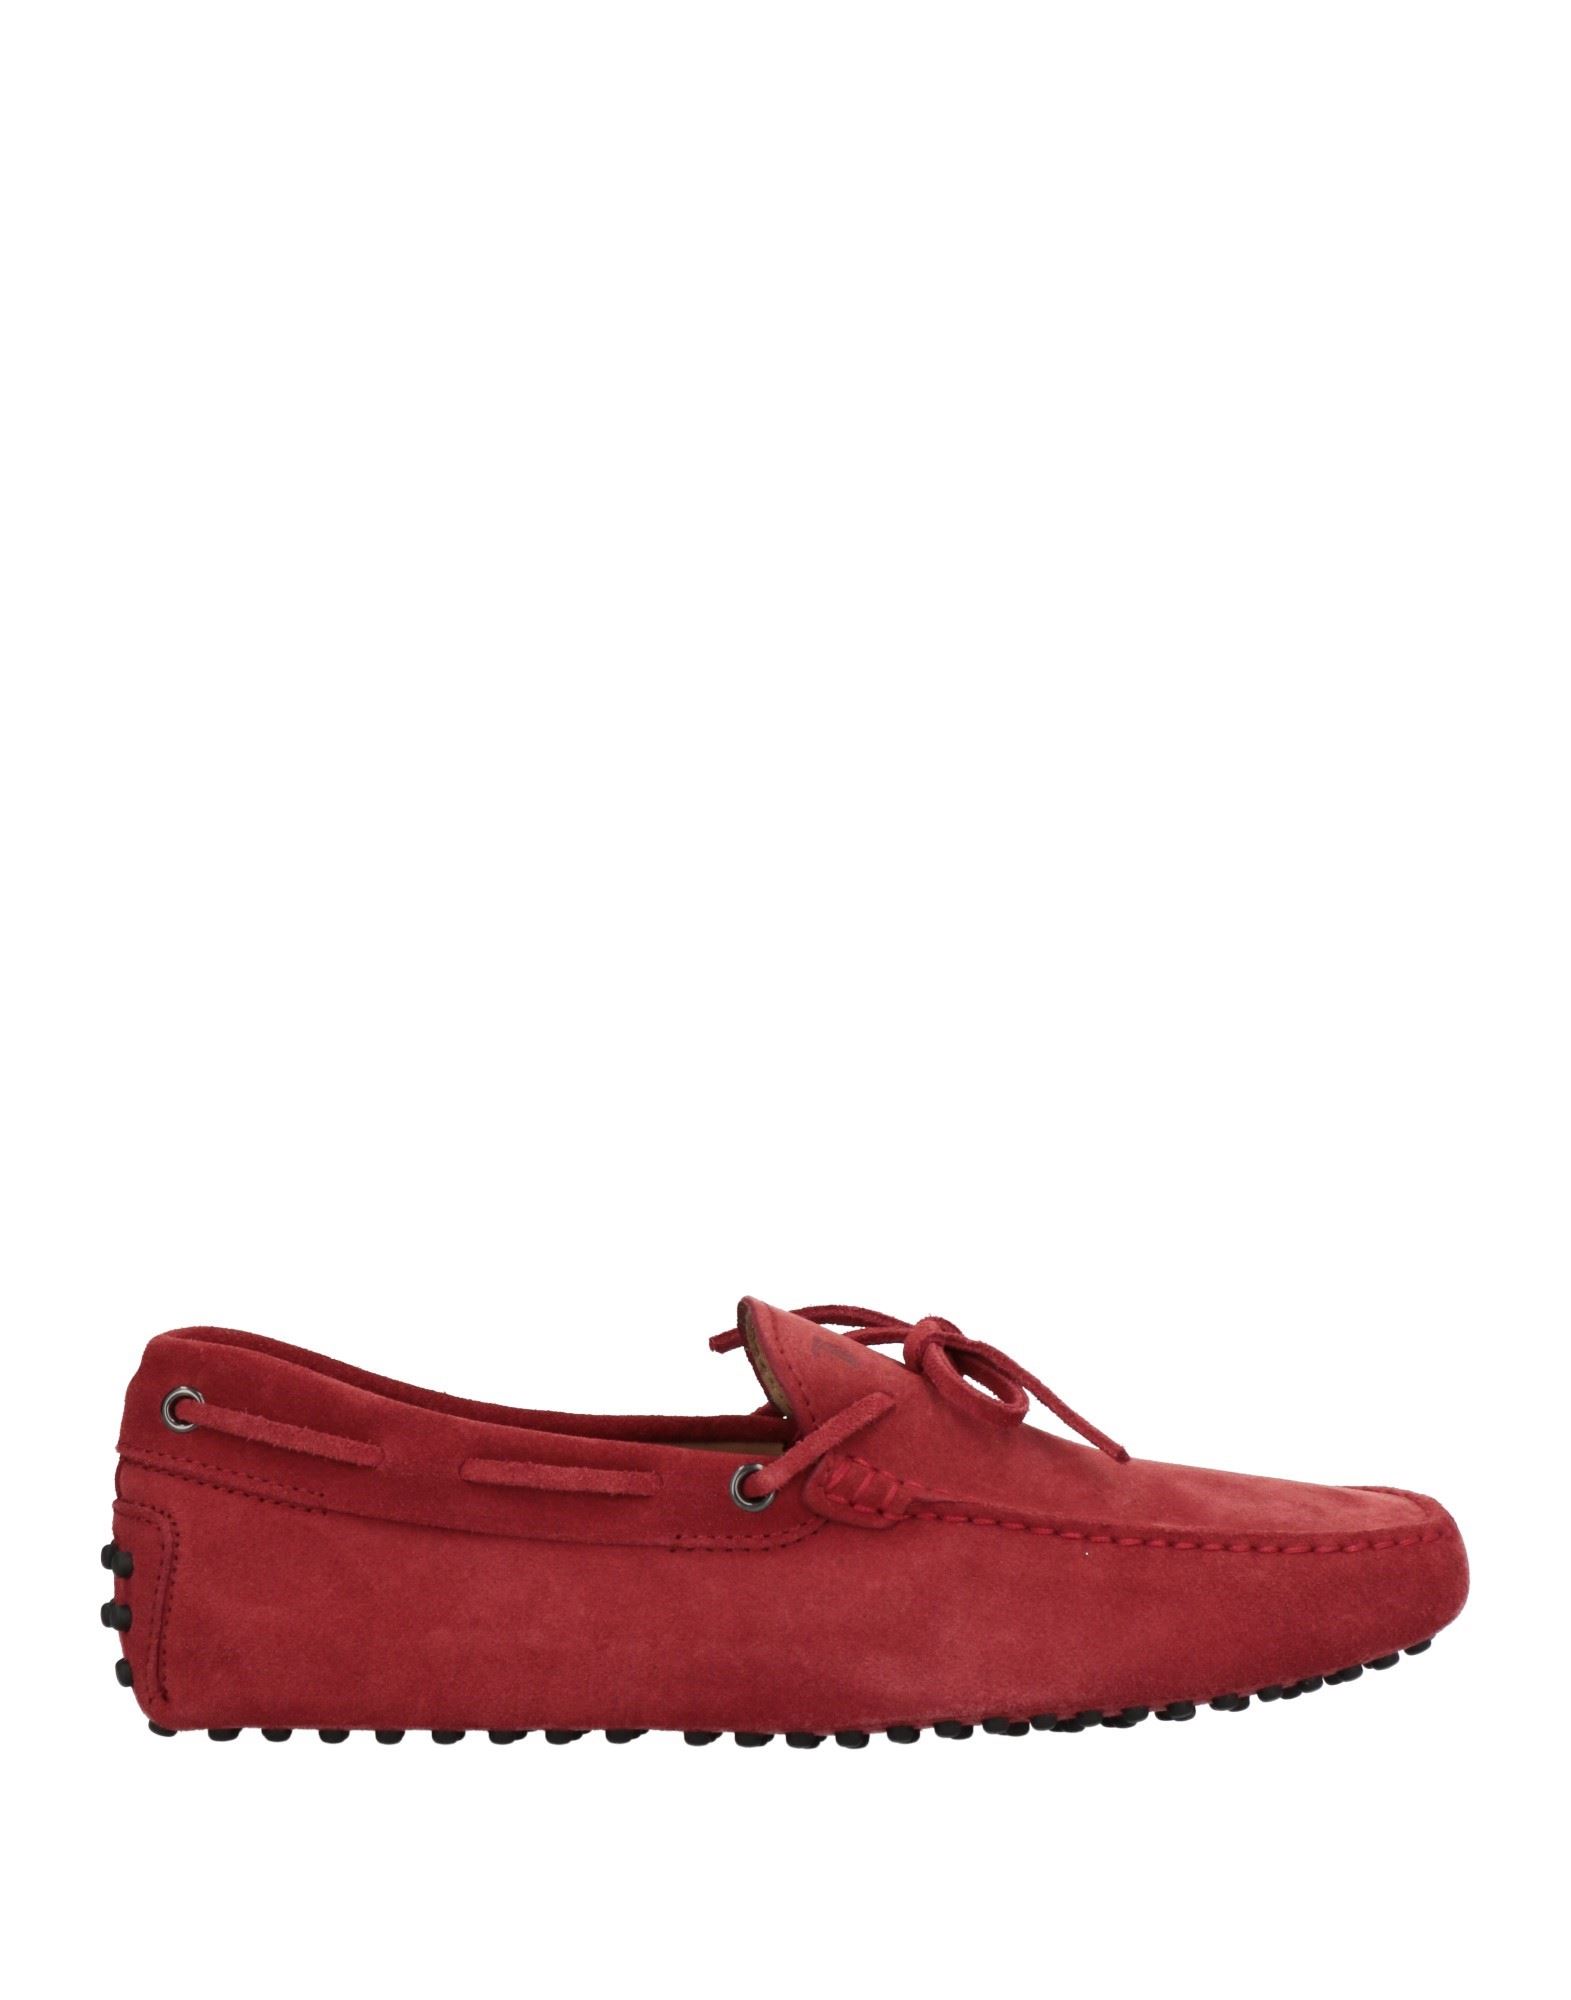 TOD'S TOD'S MAN LOAFERS BRICK RED SIZE 8 SOFT LEATHER